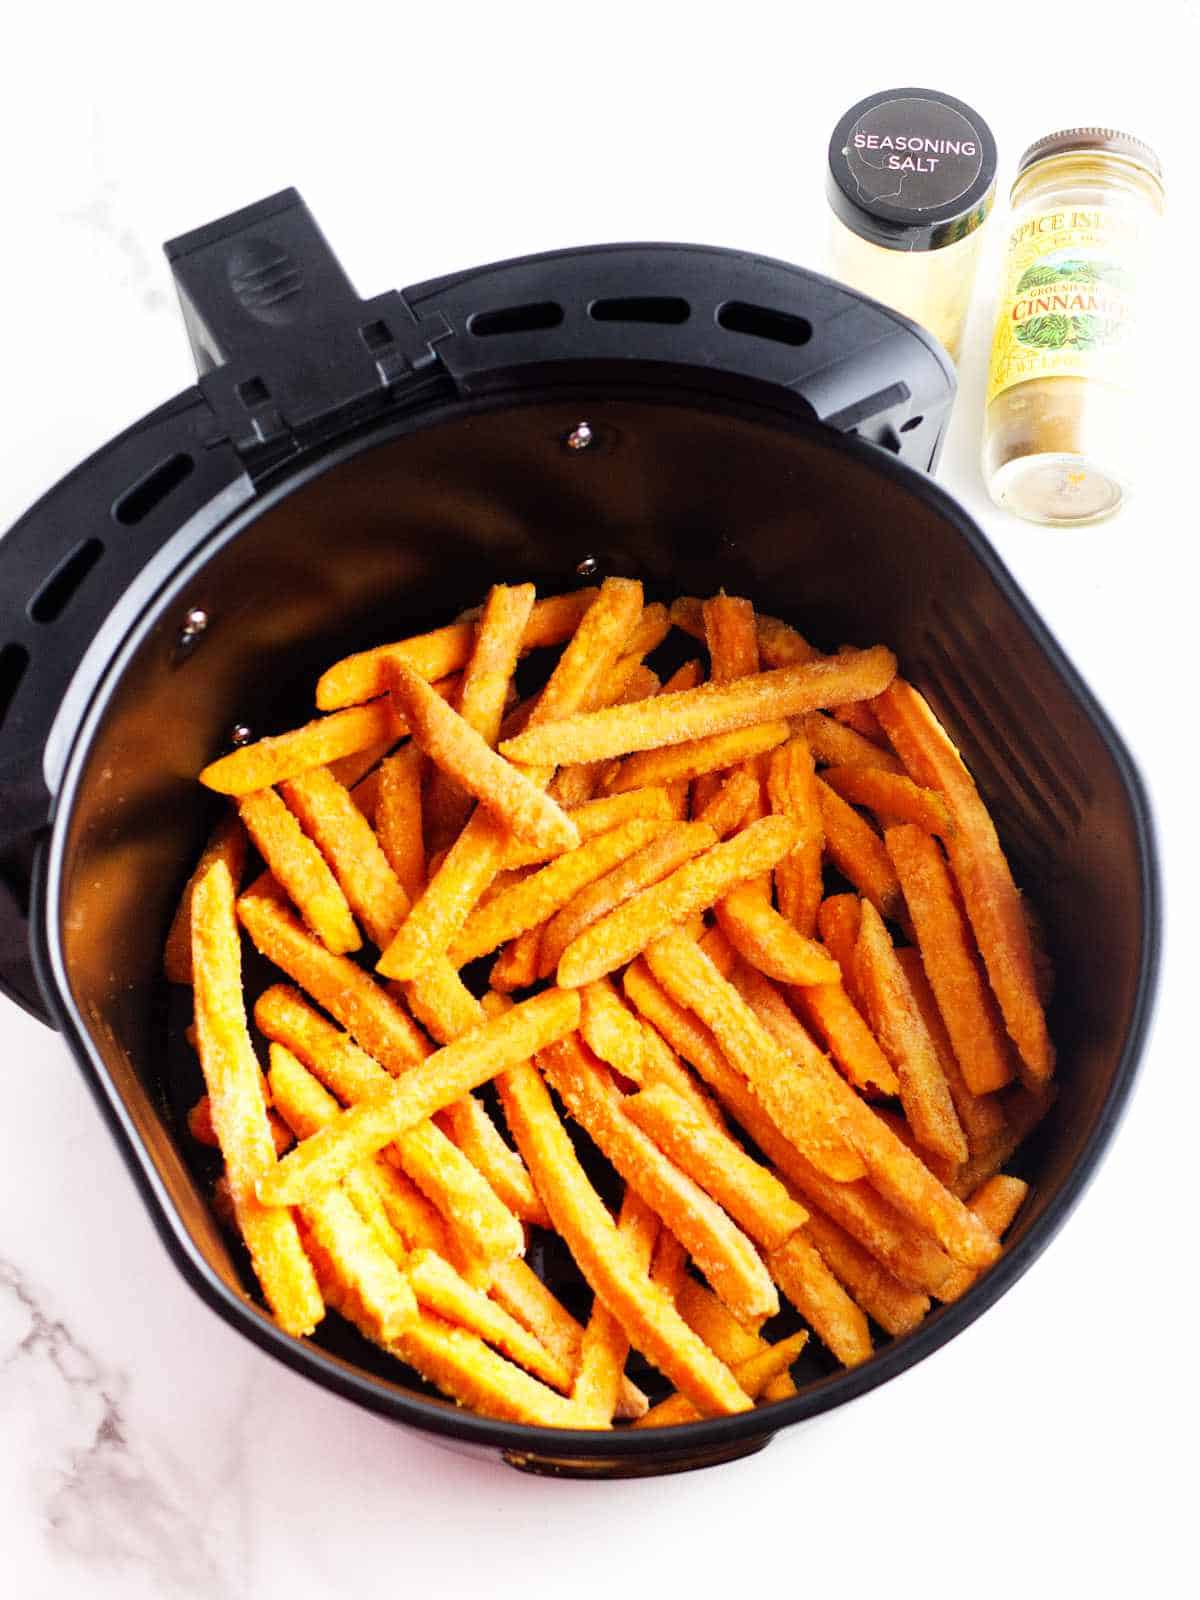 frozen frites in an air fry basket with seasoning nearby.